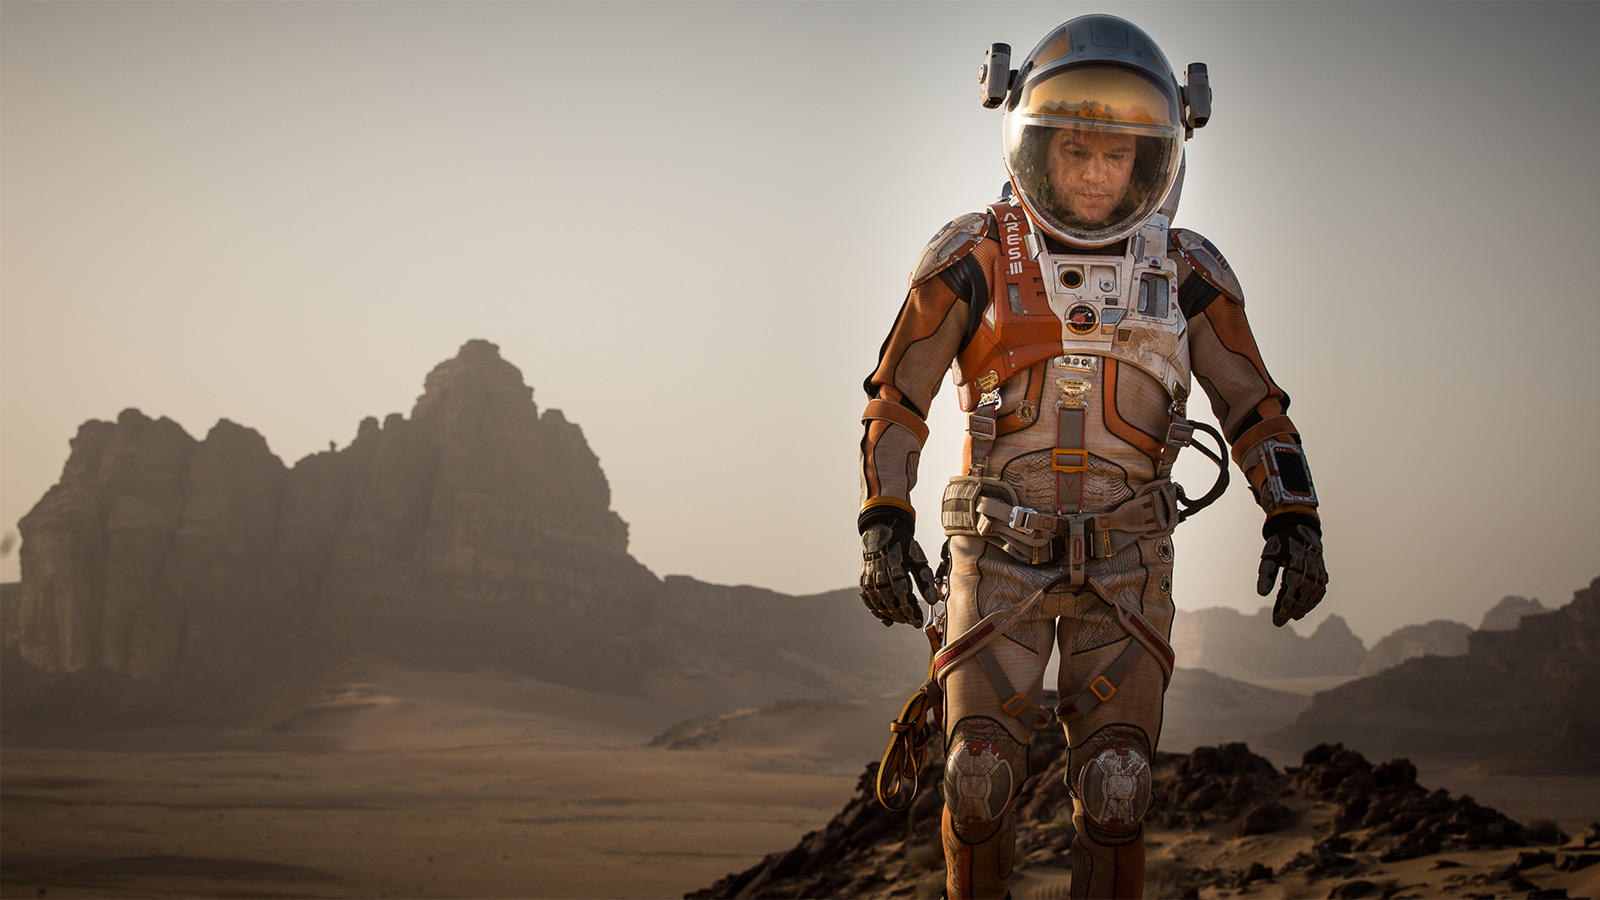 🚀 How Long Would You Last in Outer Space? The Martian